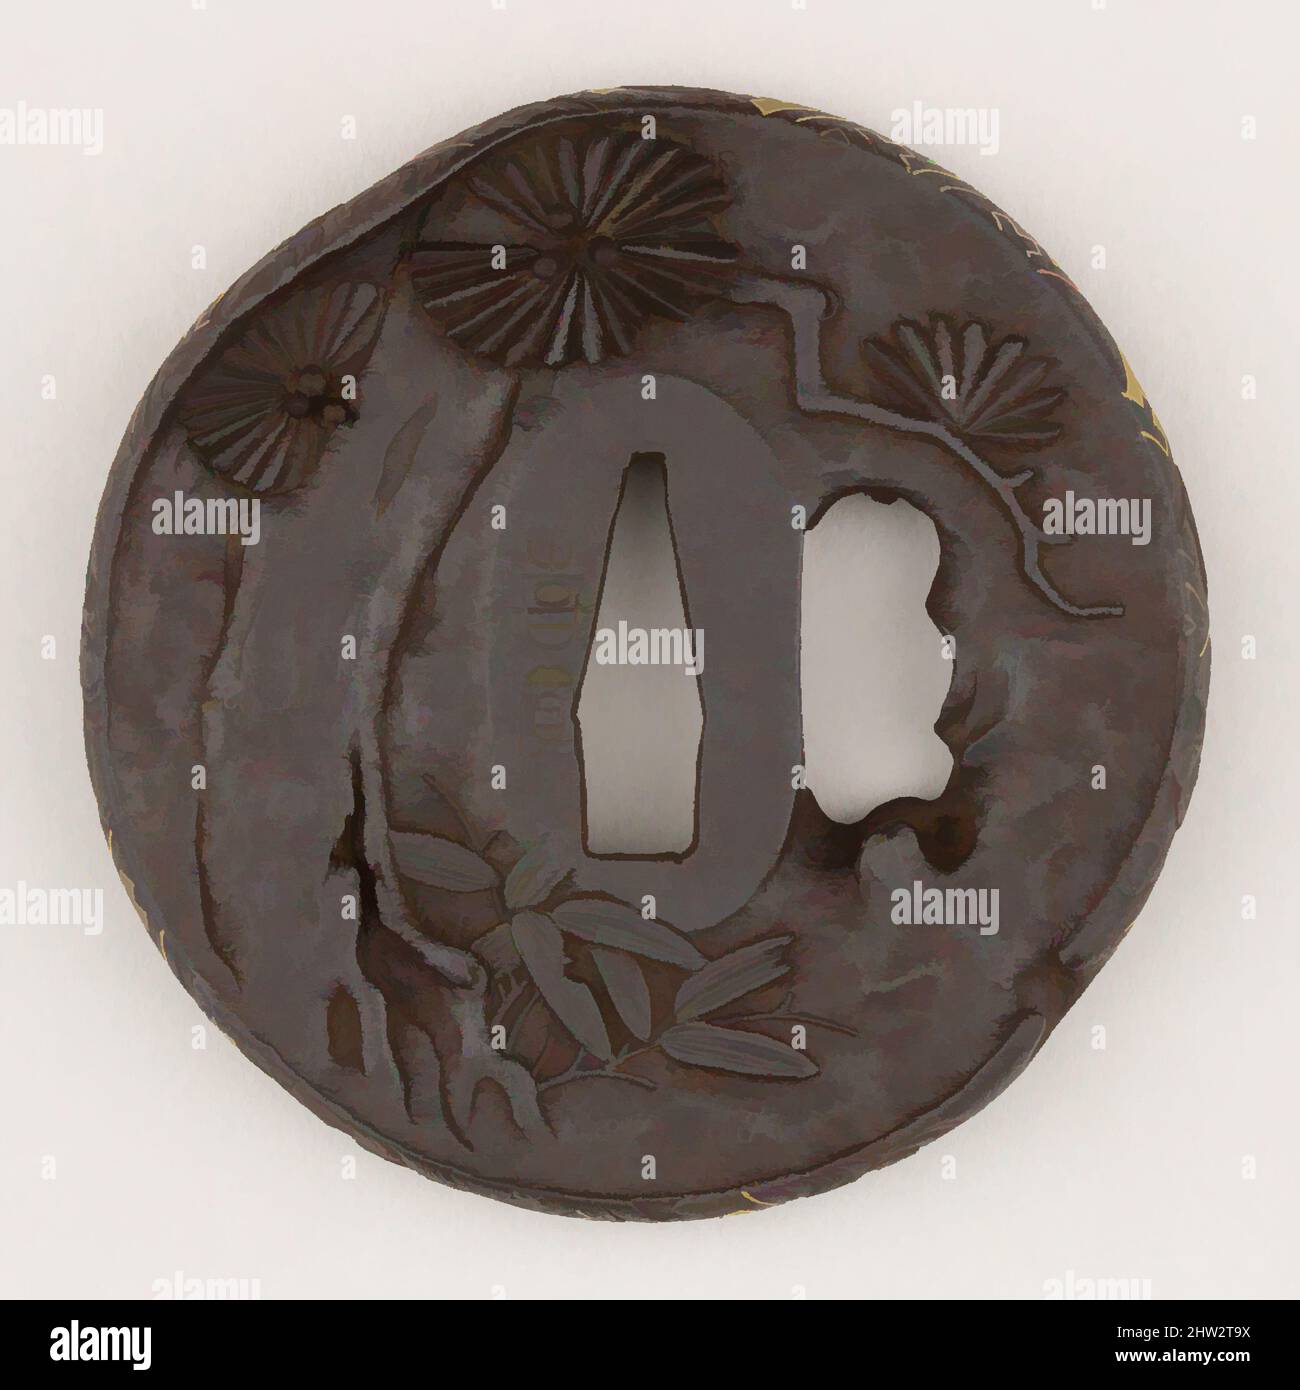 Art inspired by Sword Guard (Tsuba), 18th century, Japanese, Iron, gold, copper, D. 3 1/4 in. (8.3 cm); thickness 9/16 in. (1.4 cm); Wt. 8.9 oz. (252.3 g), Sword Furniture-Tsuba, Classic works modernized by Artotop with a splash of modernity. Shapes, color and value, eye-catching visual impact on art. Emotions through freedom of artworks in a contemporary way. A timeless message pursuing a wildly creative new direction. Artists turning to the digital medium and creating the Artotop NFT Stock Photo